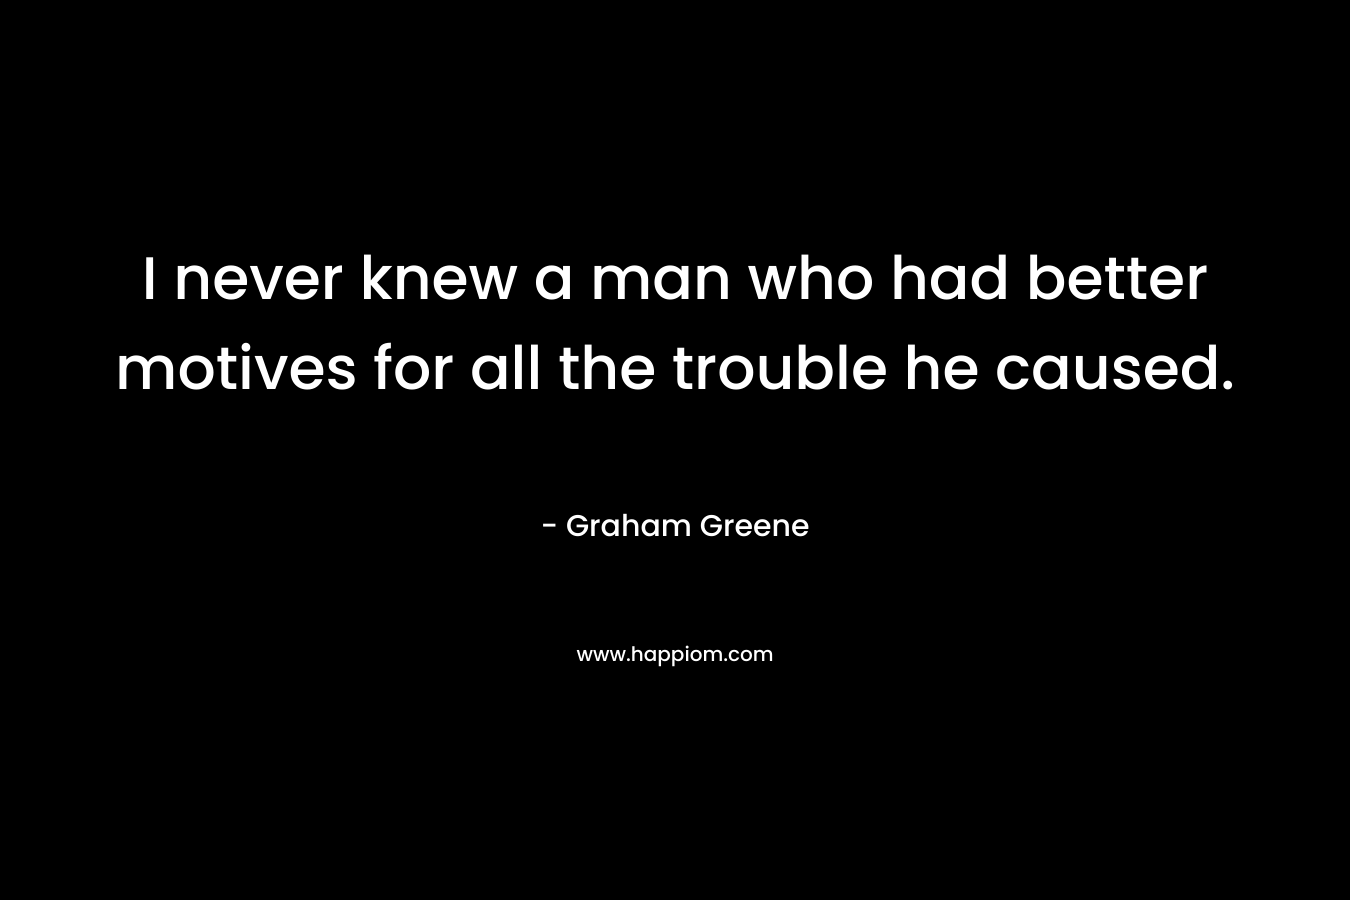 I never knew a man who had better motives for all the trouble he caused. – Graham Greene